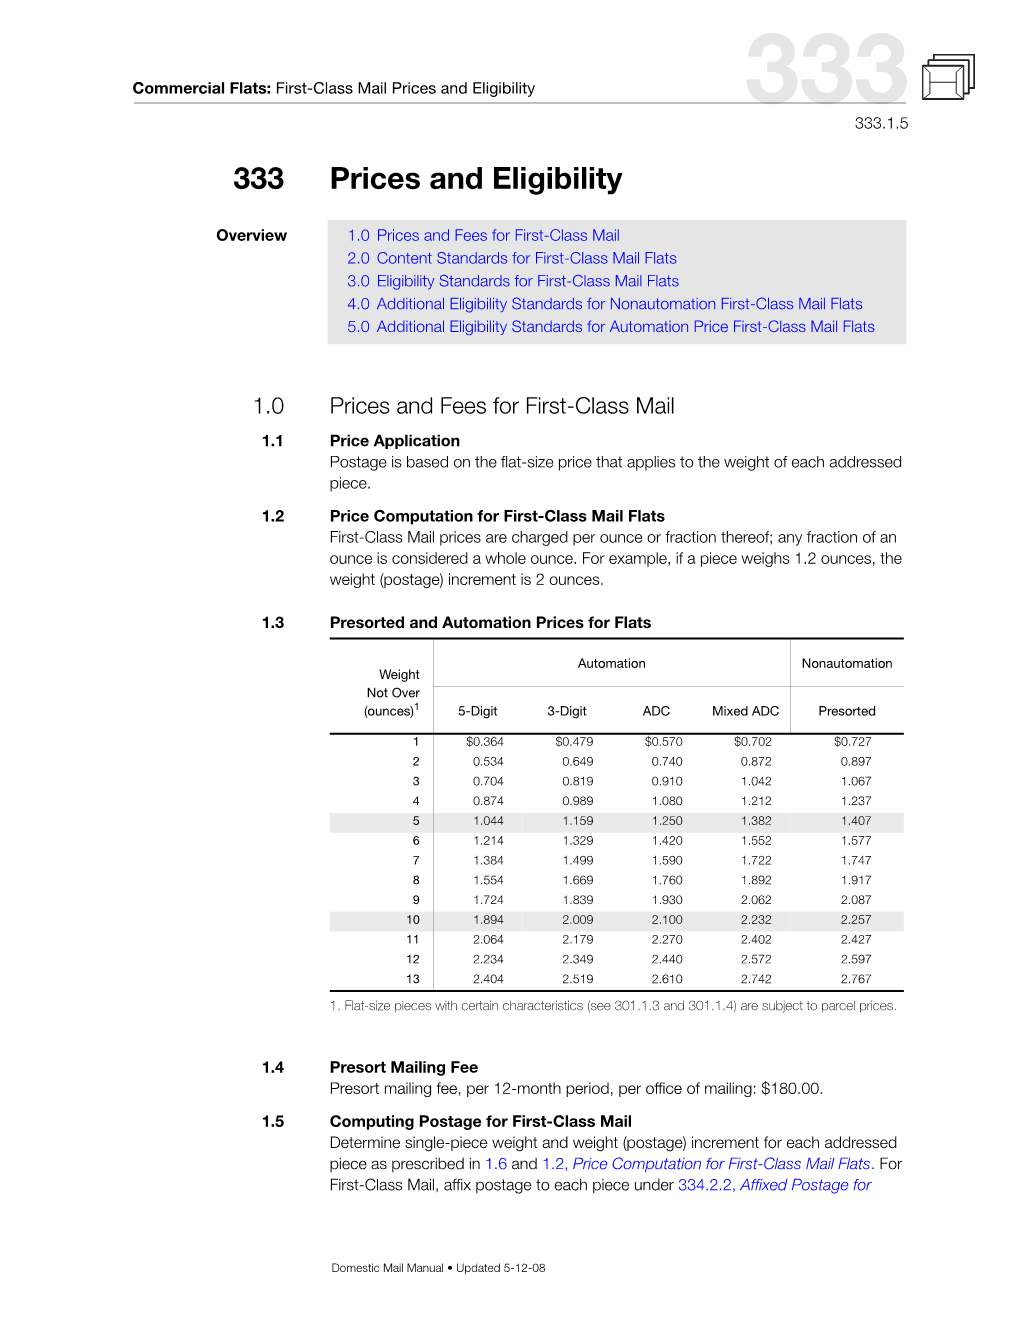 Eligibility Standards for First-Class Mail Flats